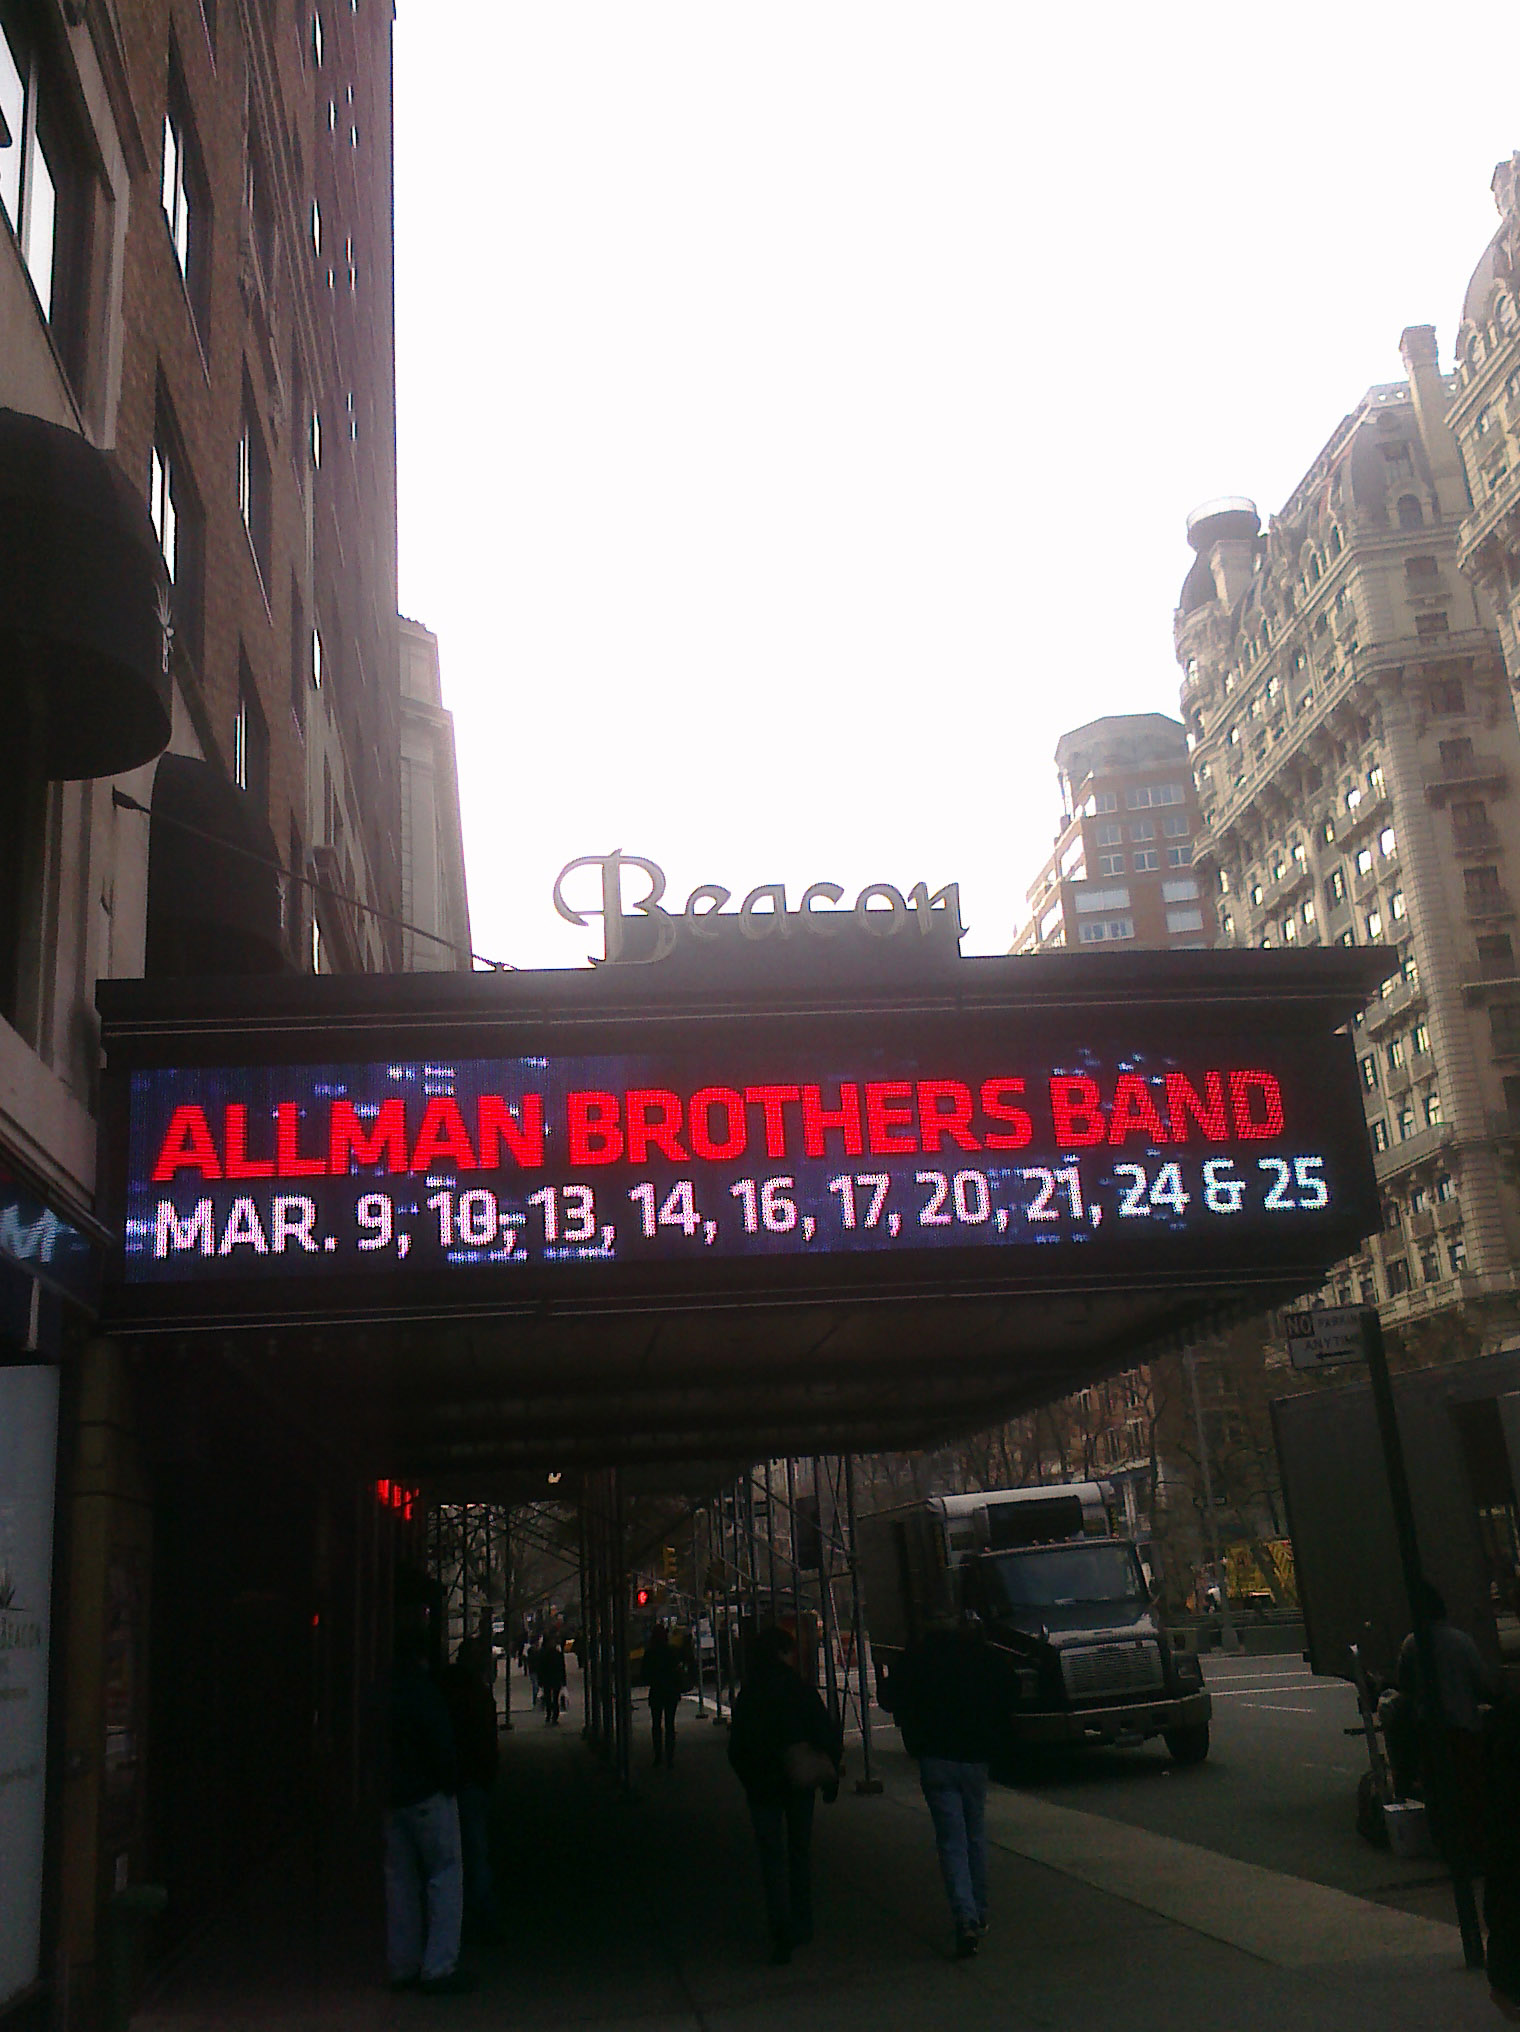 The Beacon Theater proudly announces the Allman Brothers Band 2012 run!!!